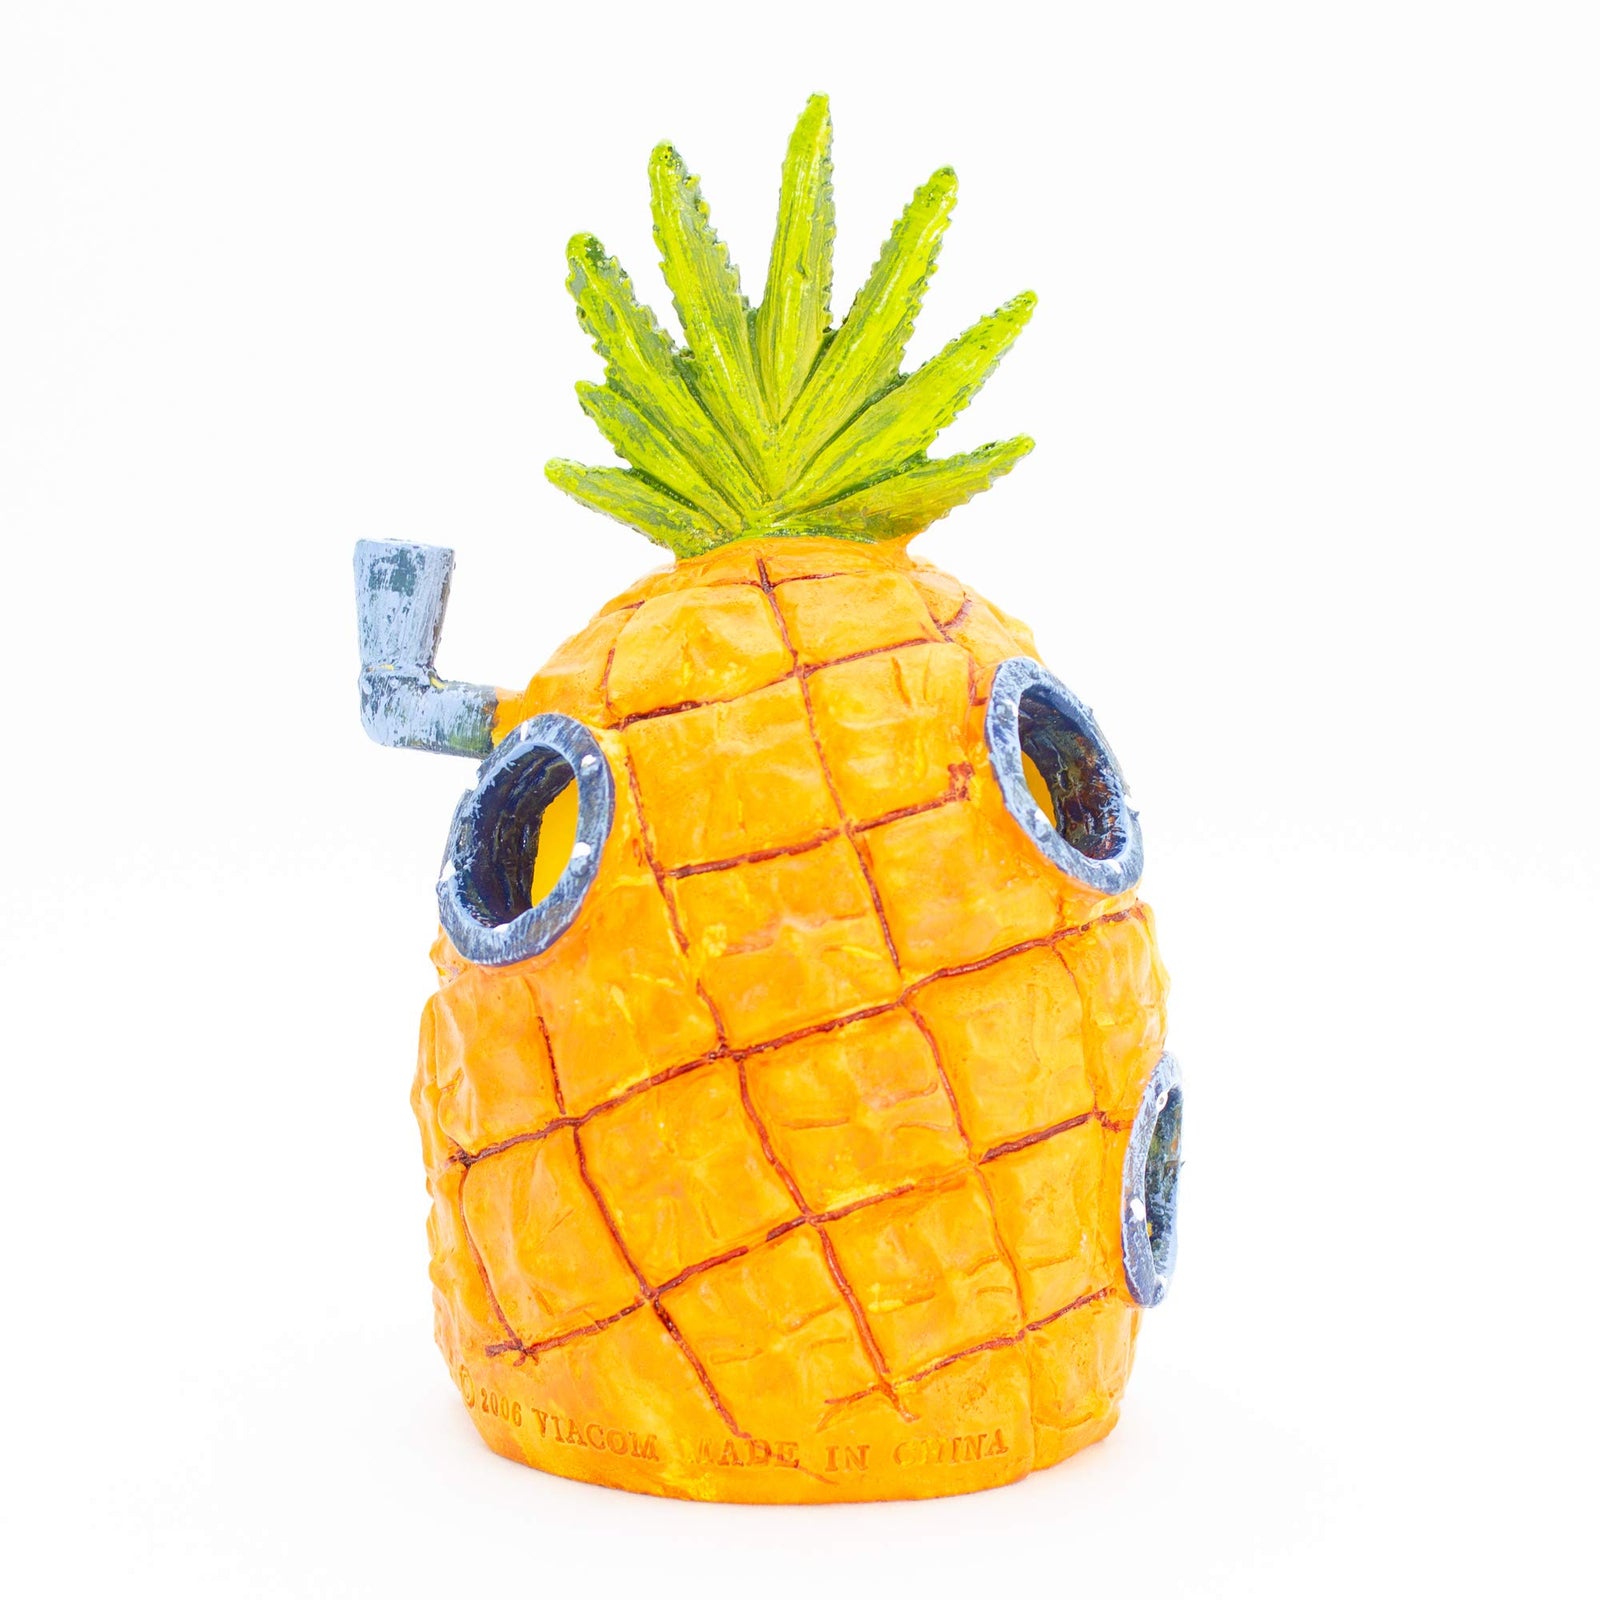 Penn-Plax Officially Licensed Nickelodeon SpongeBob Aquarium Ornament – SpongeBob’s Pineapple House - Perfect for Fish to Swim In and Around - Full Color 6" Decoration